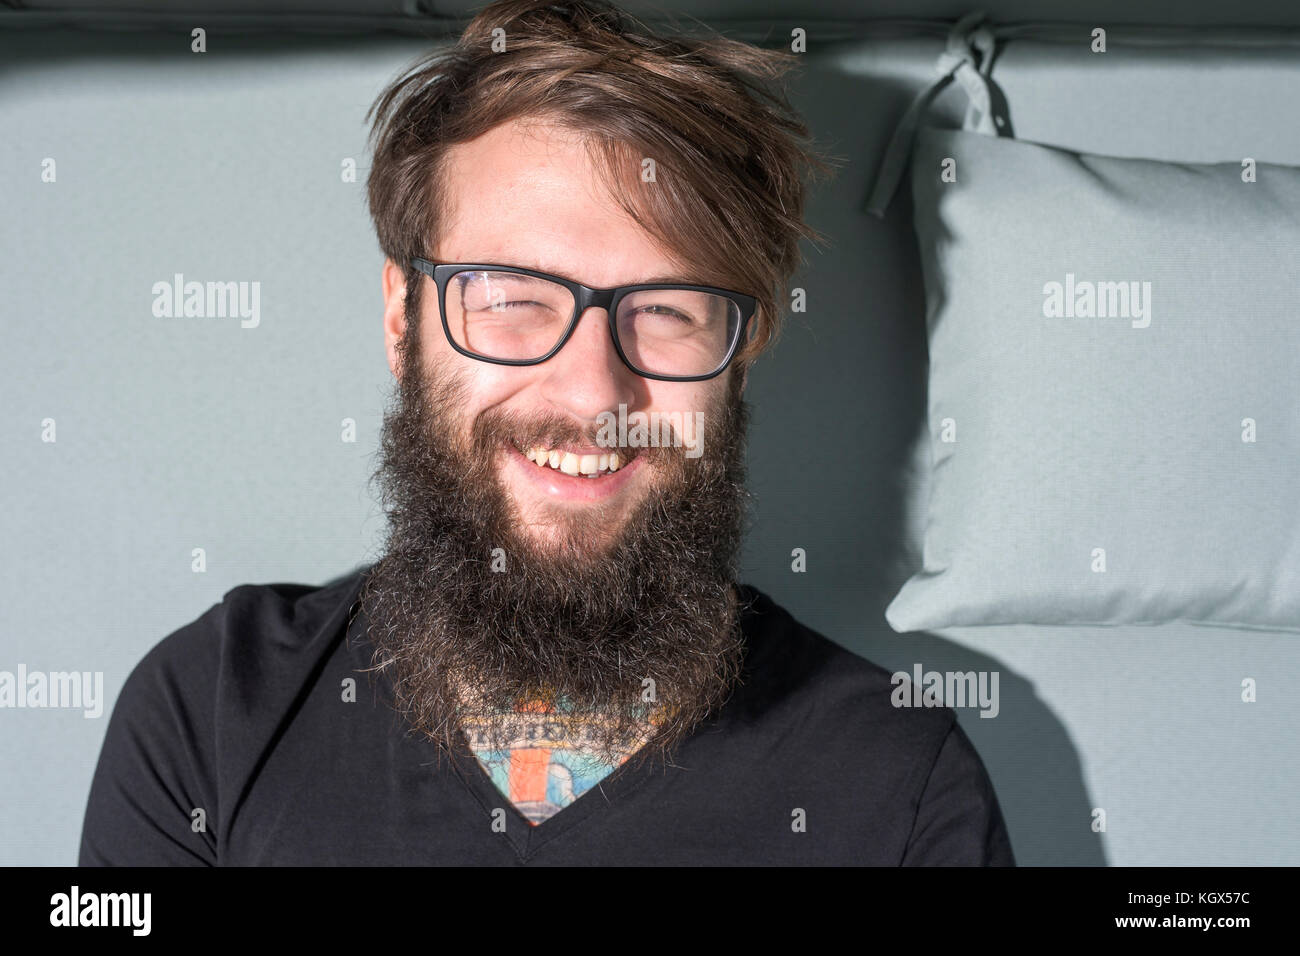 hipster man with beard and glasses Stock Photo